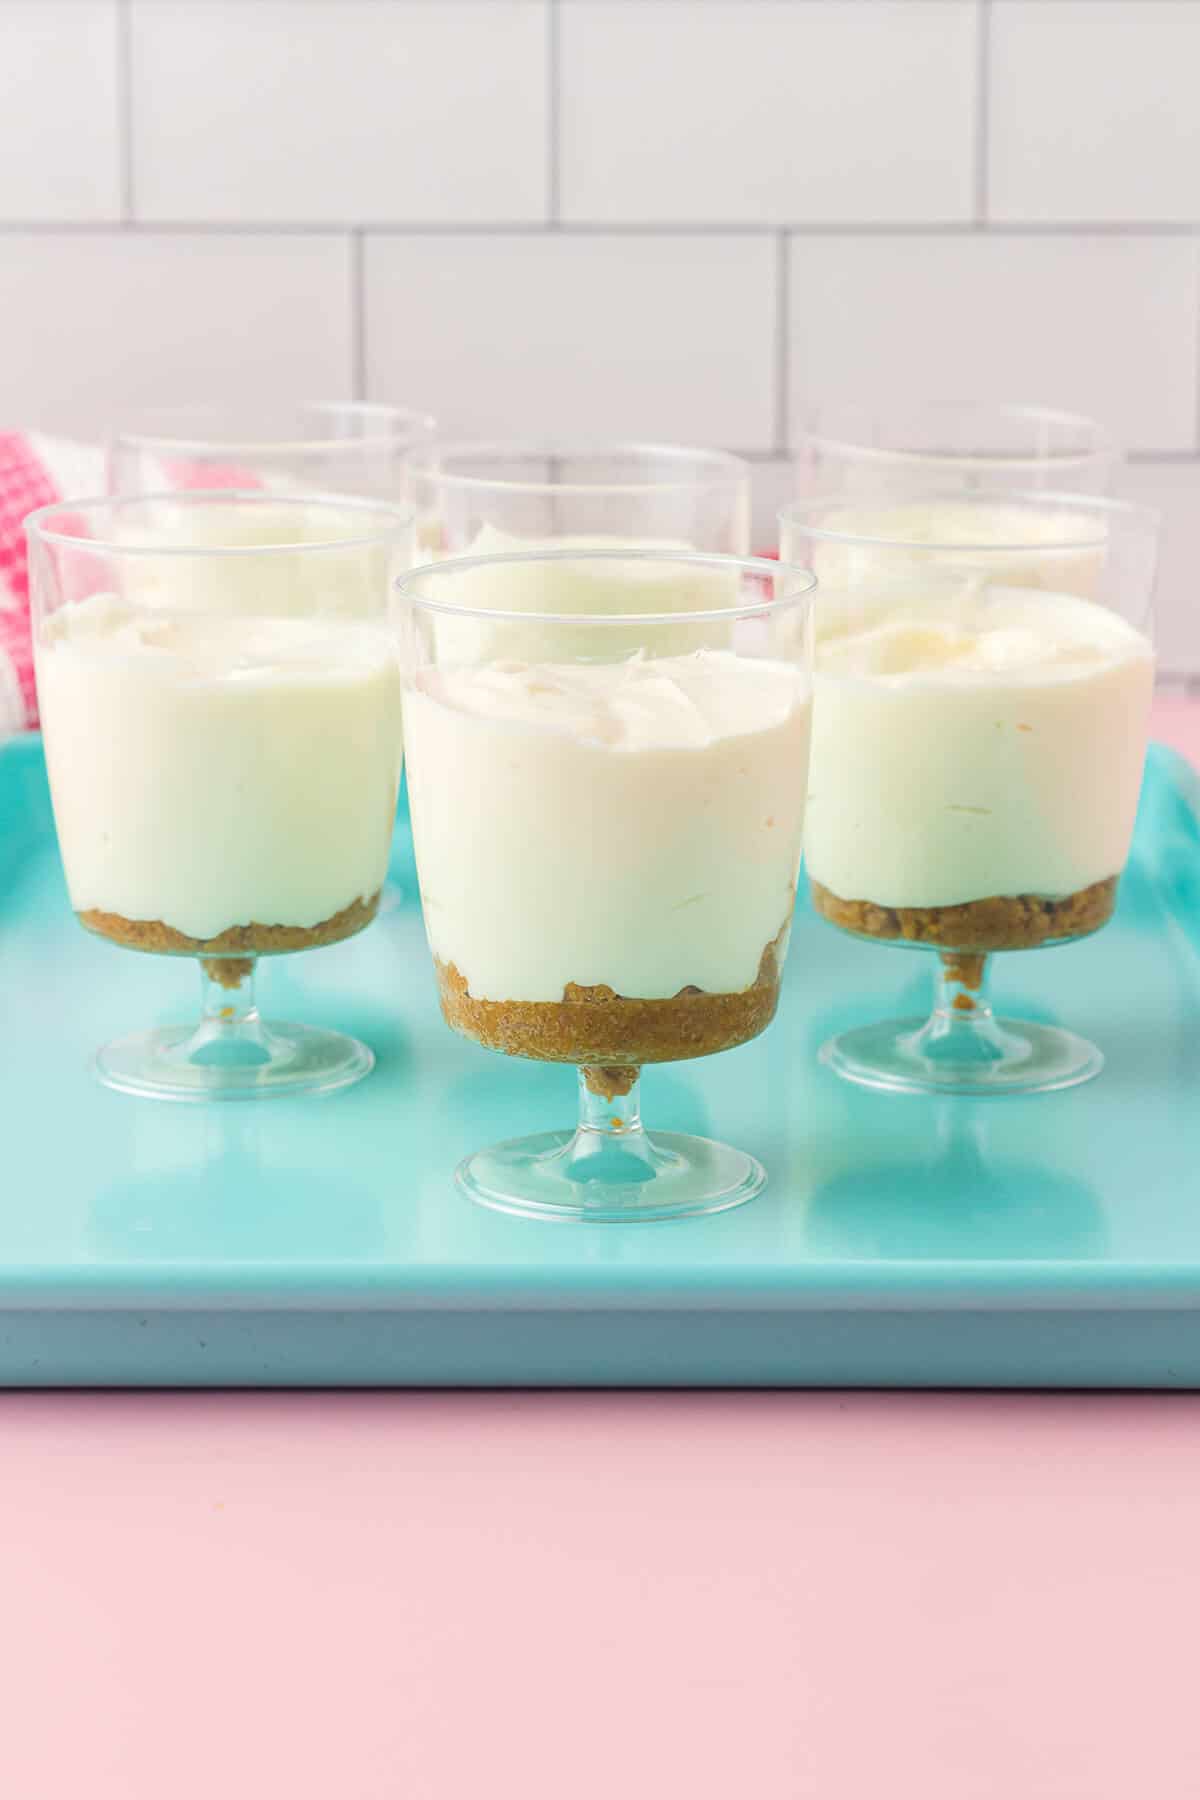 Dessert cups filled with graham cracker base and cream cheese mixture.